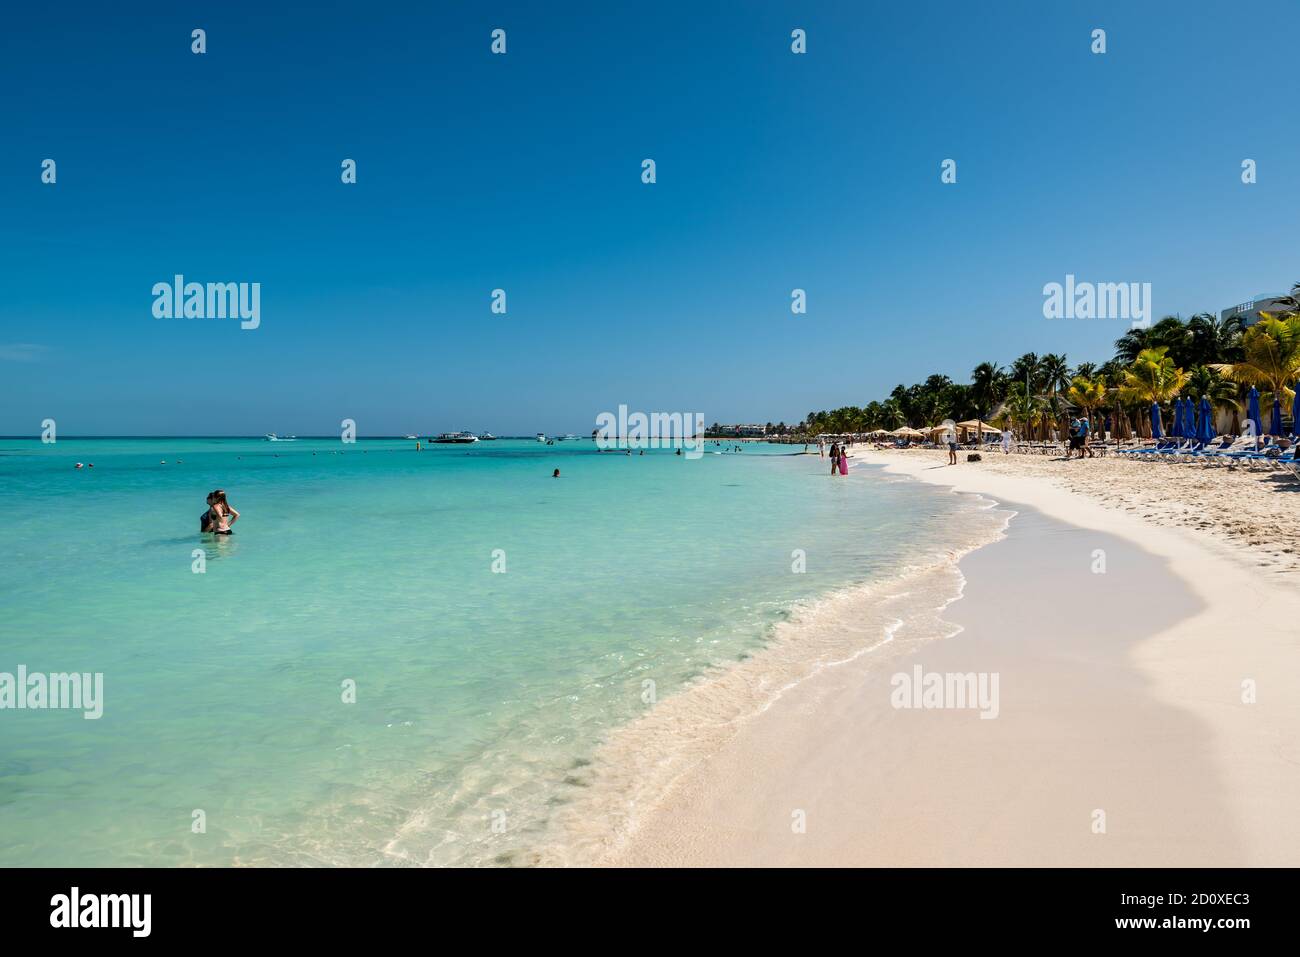 Isla Mujeres (Cancùn), Mexico: tropical  seascape of Playa Norte (North Beach) during a holiday period. Stock Photo